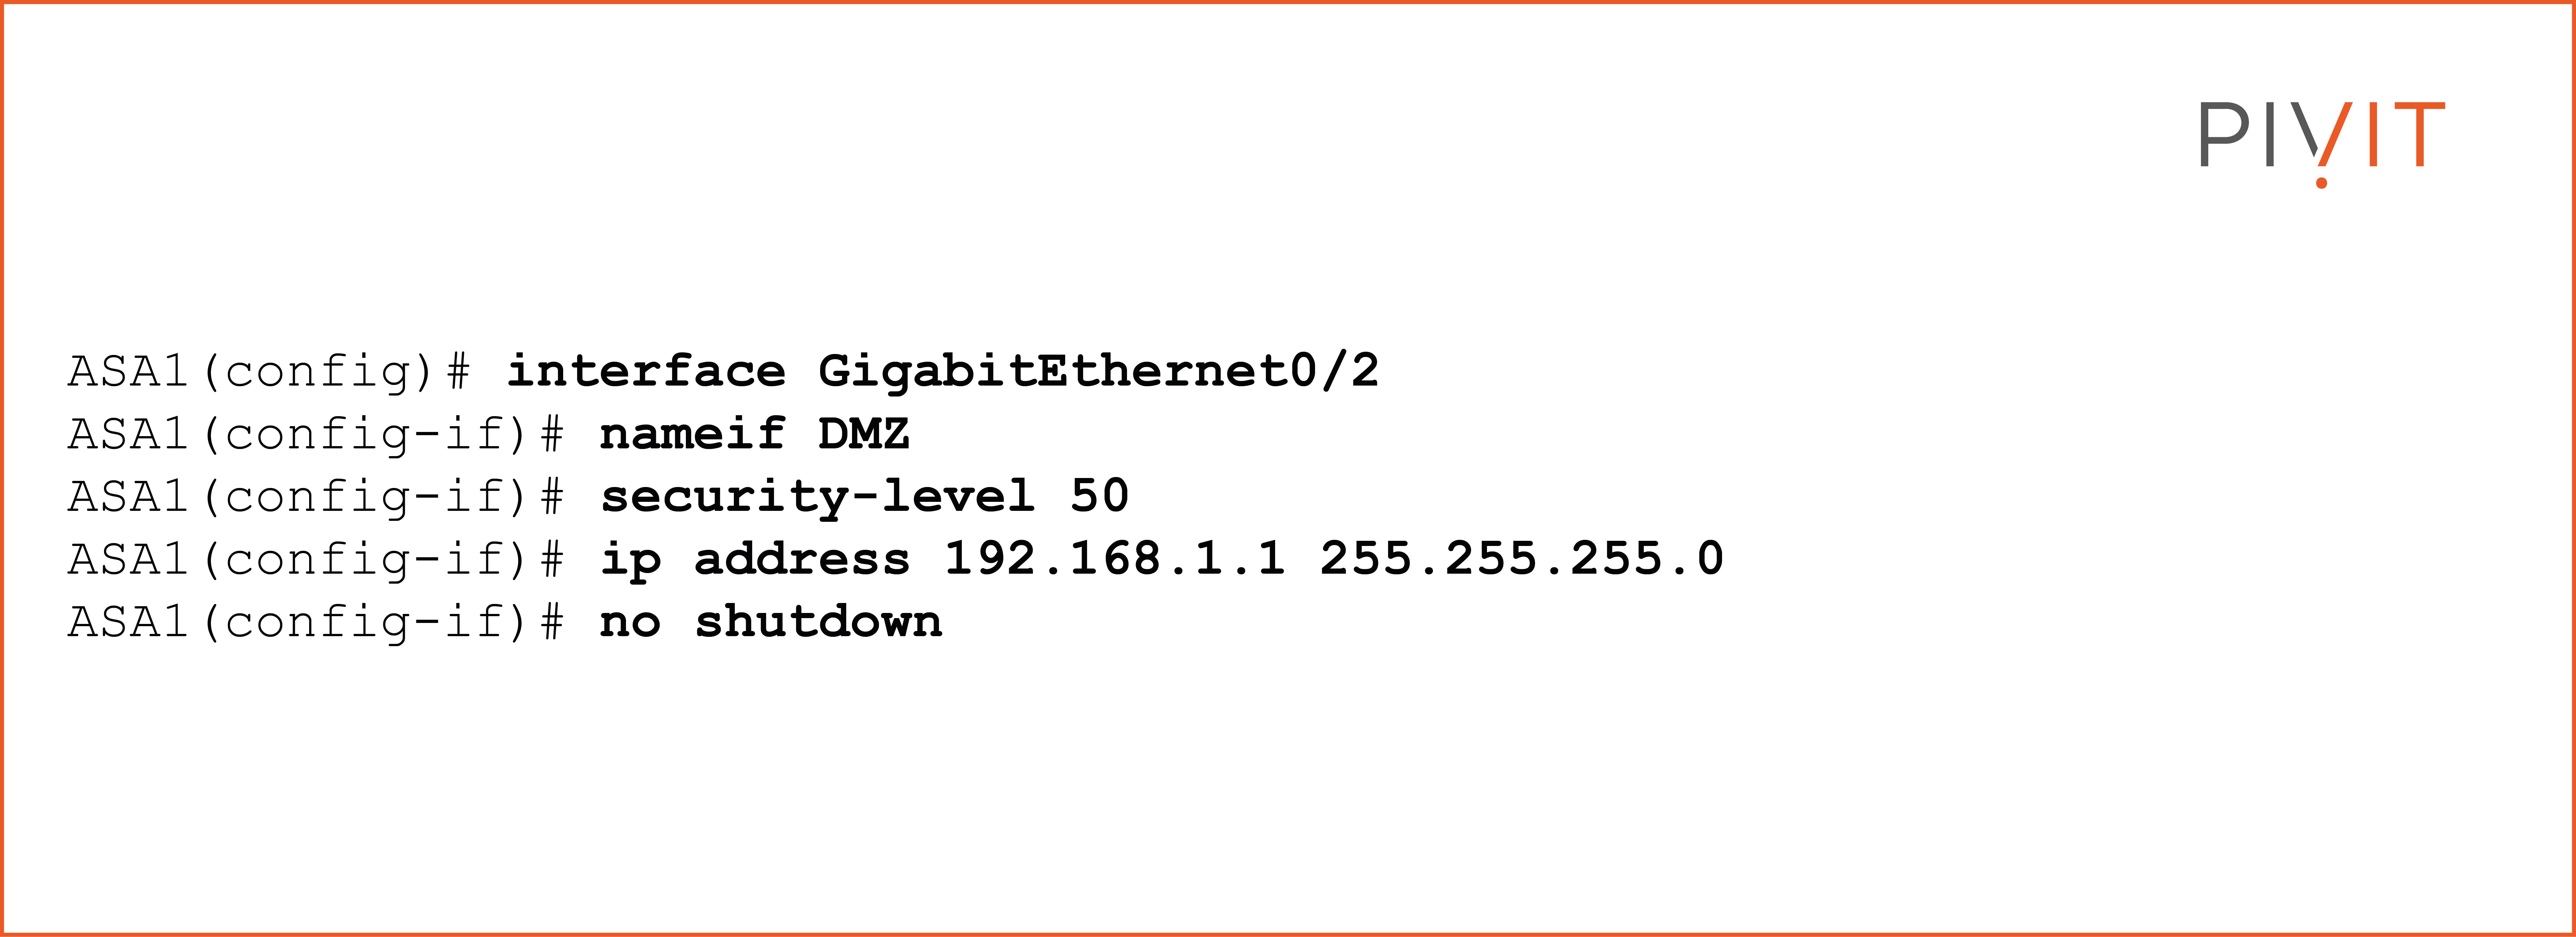 Commands to enable the interface GigabitEthernet0/2, name it DMZ, set a security level of 50, and assign the IP address 192.168.1.1/24 to it